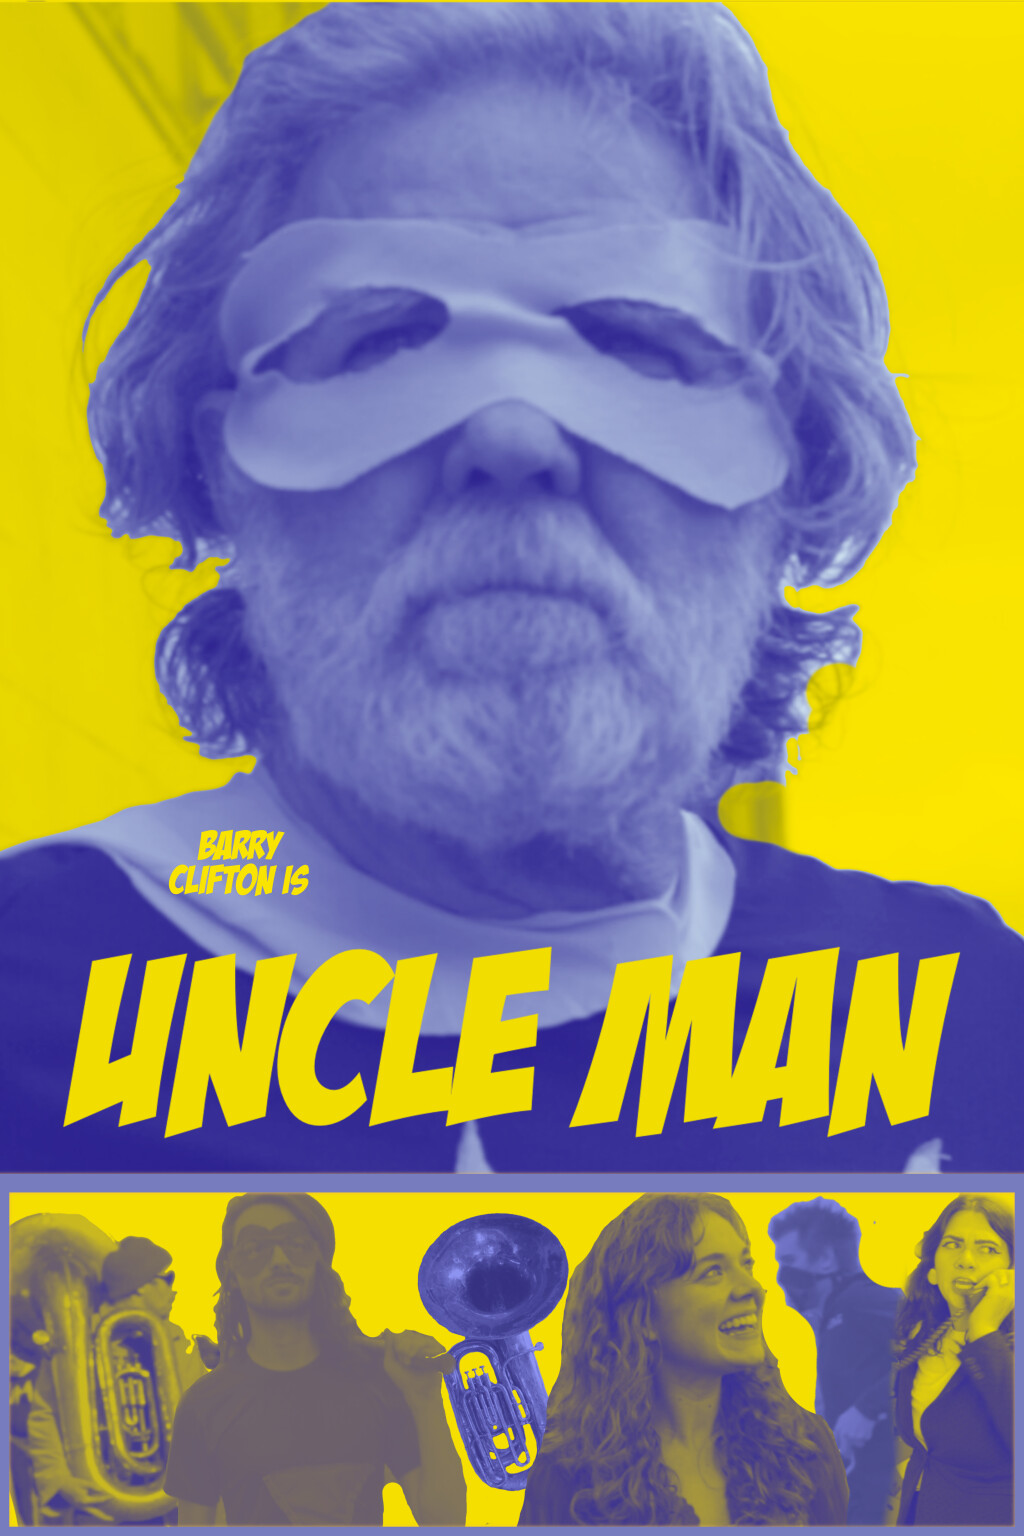 Filmposter for Uncle Man